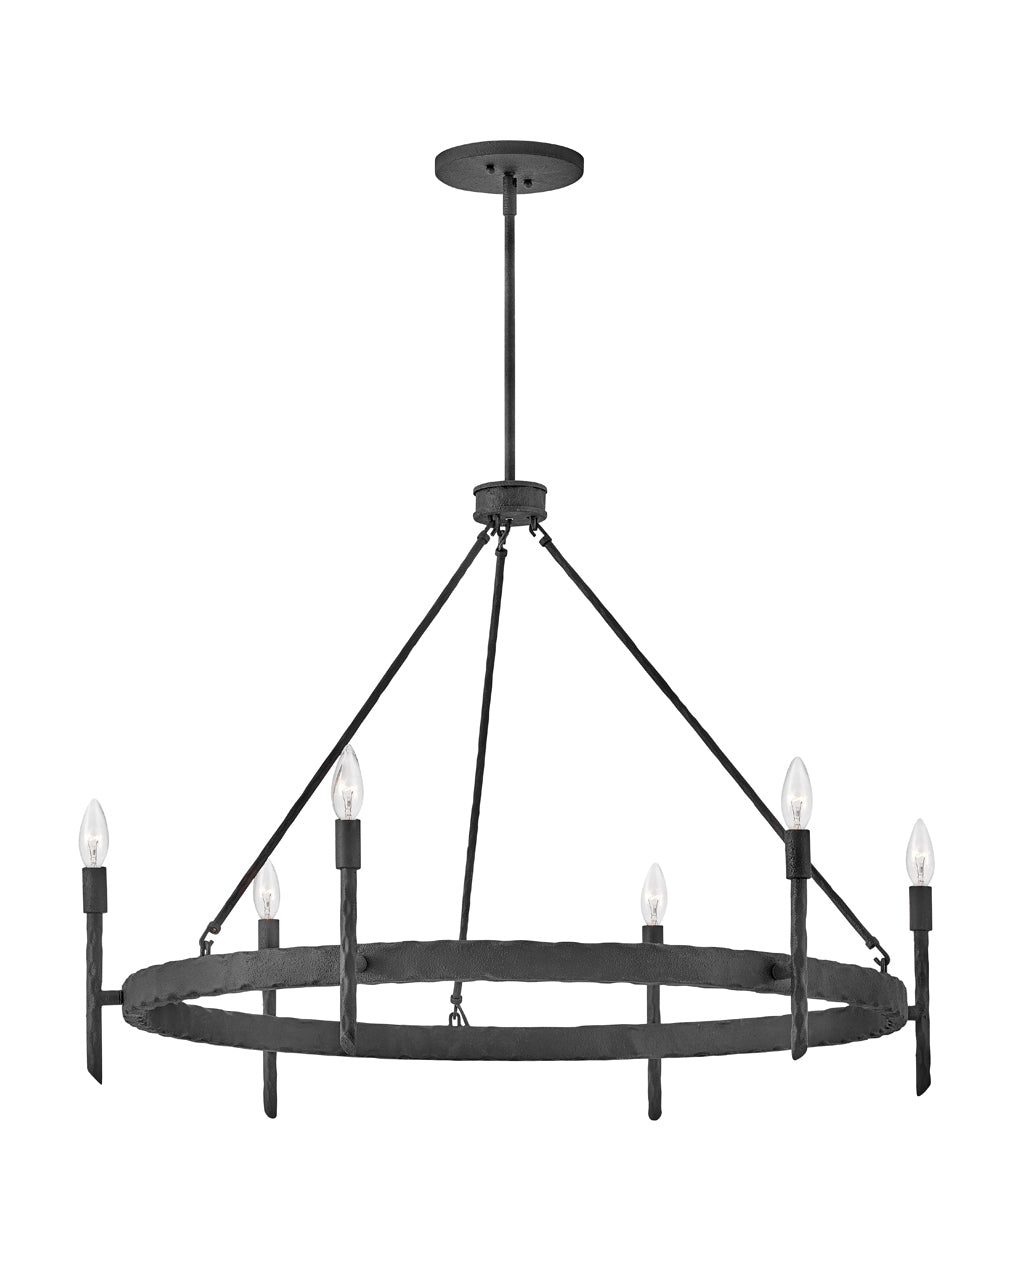 Hinkley Tress Chandelier Chandeliers Hinkley Forged Iron 36.25x36.25x26.0 